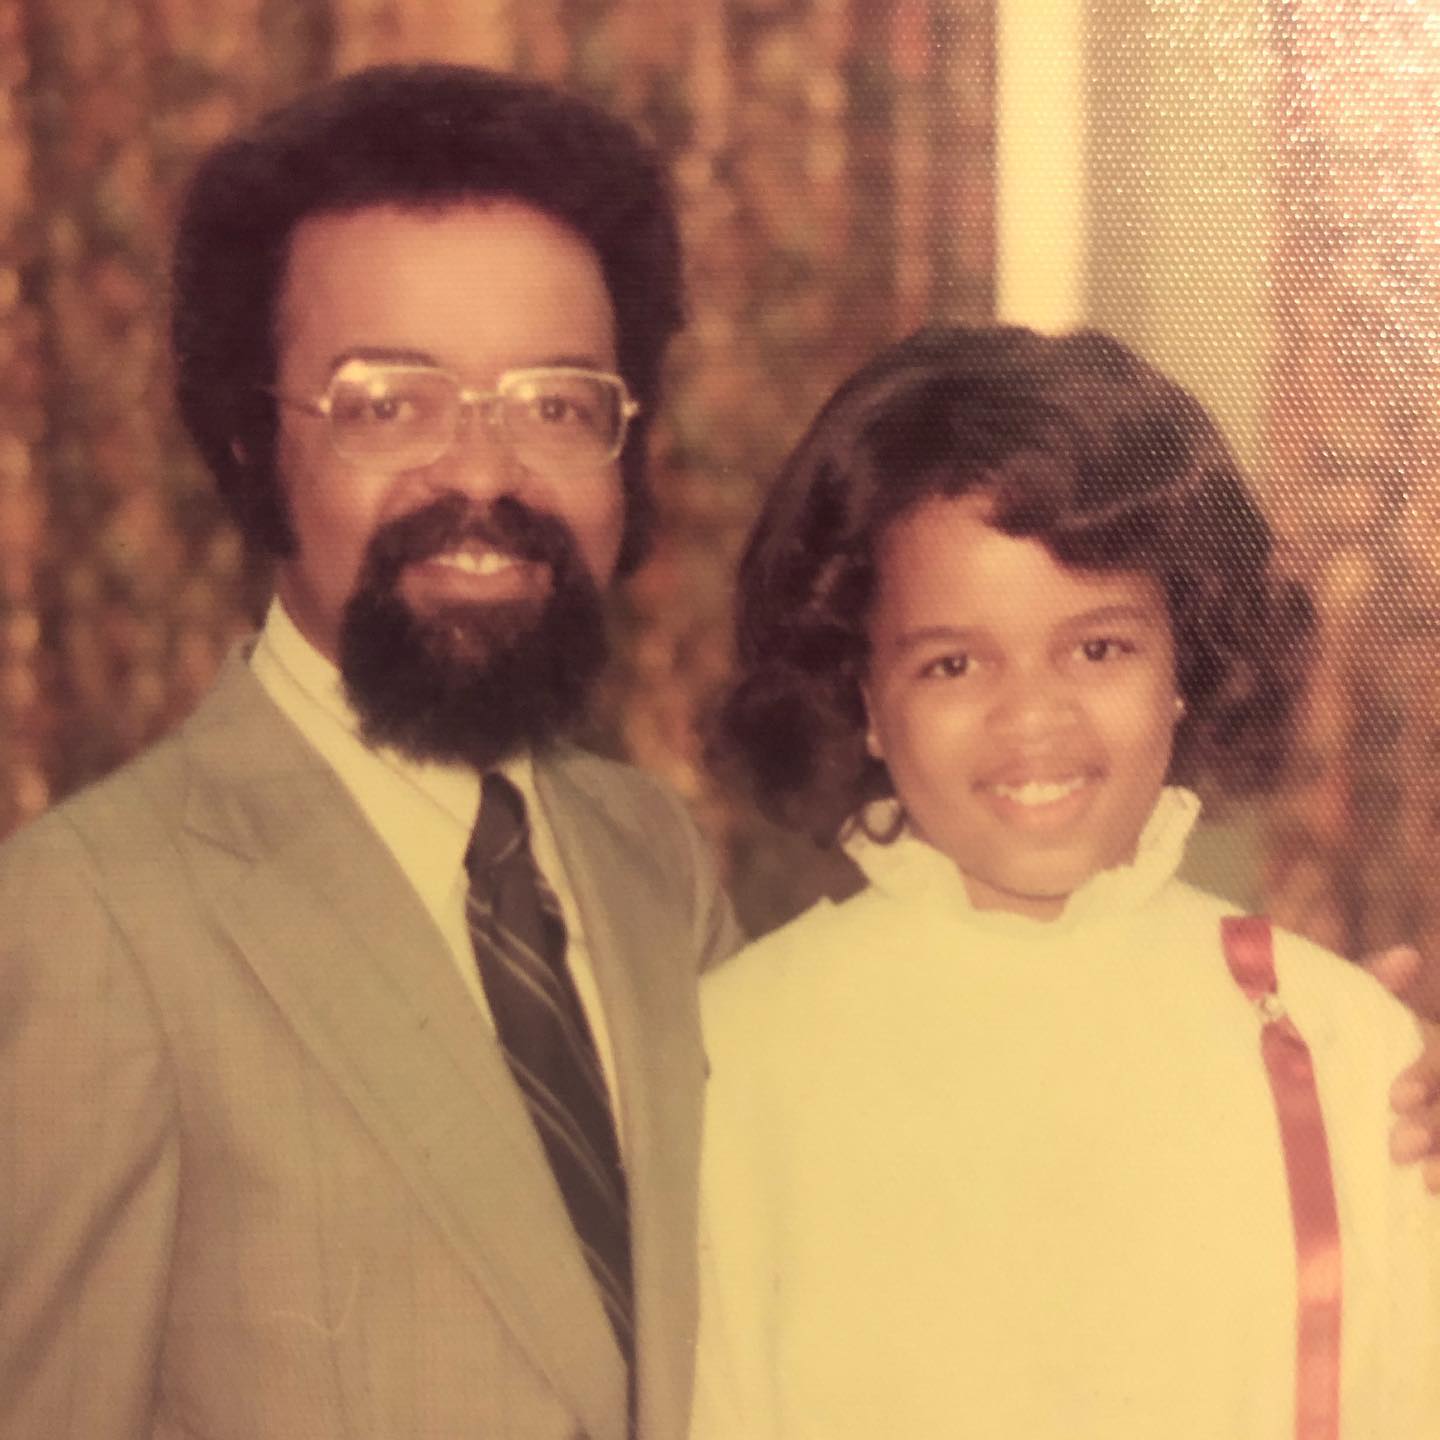 Paula Newsome with her late father, Max Donald Newsome, during her childhood